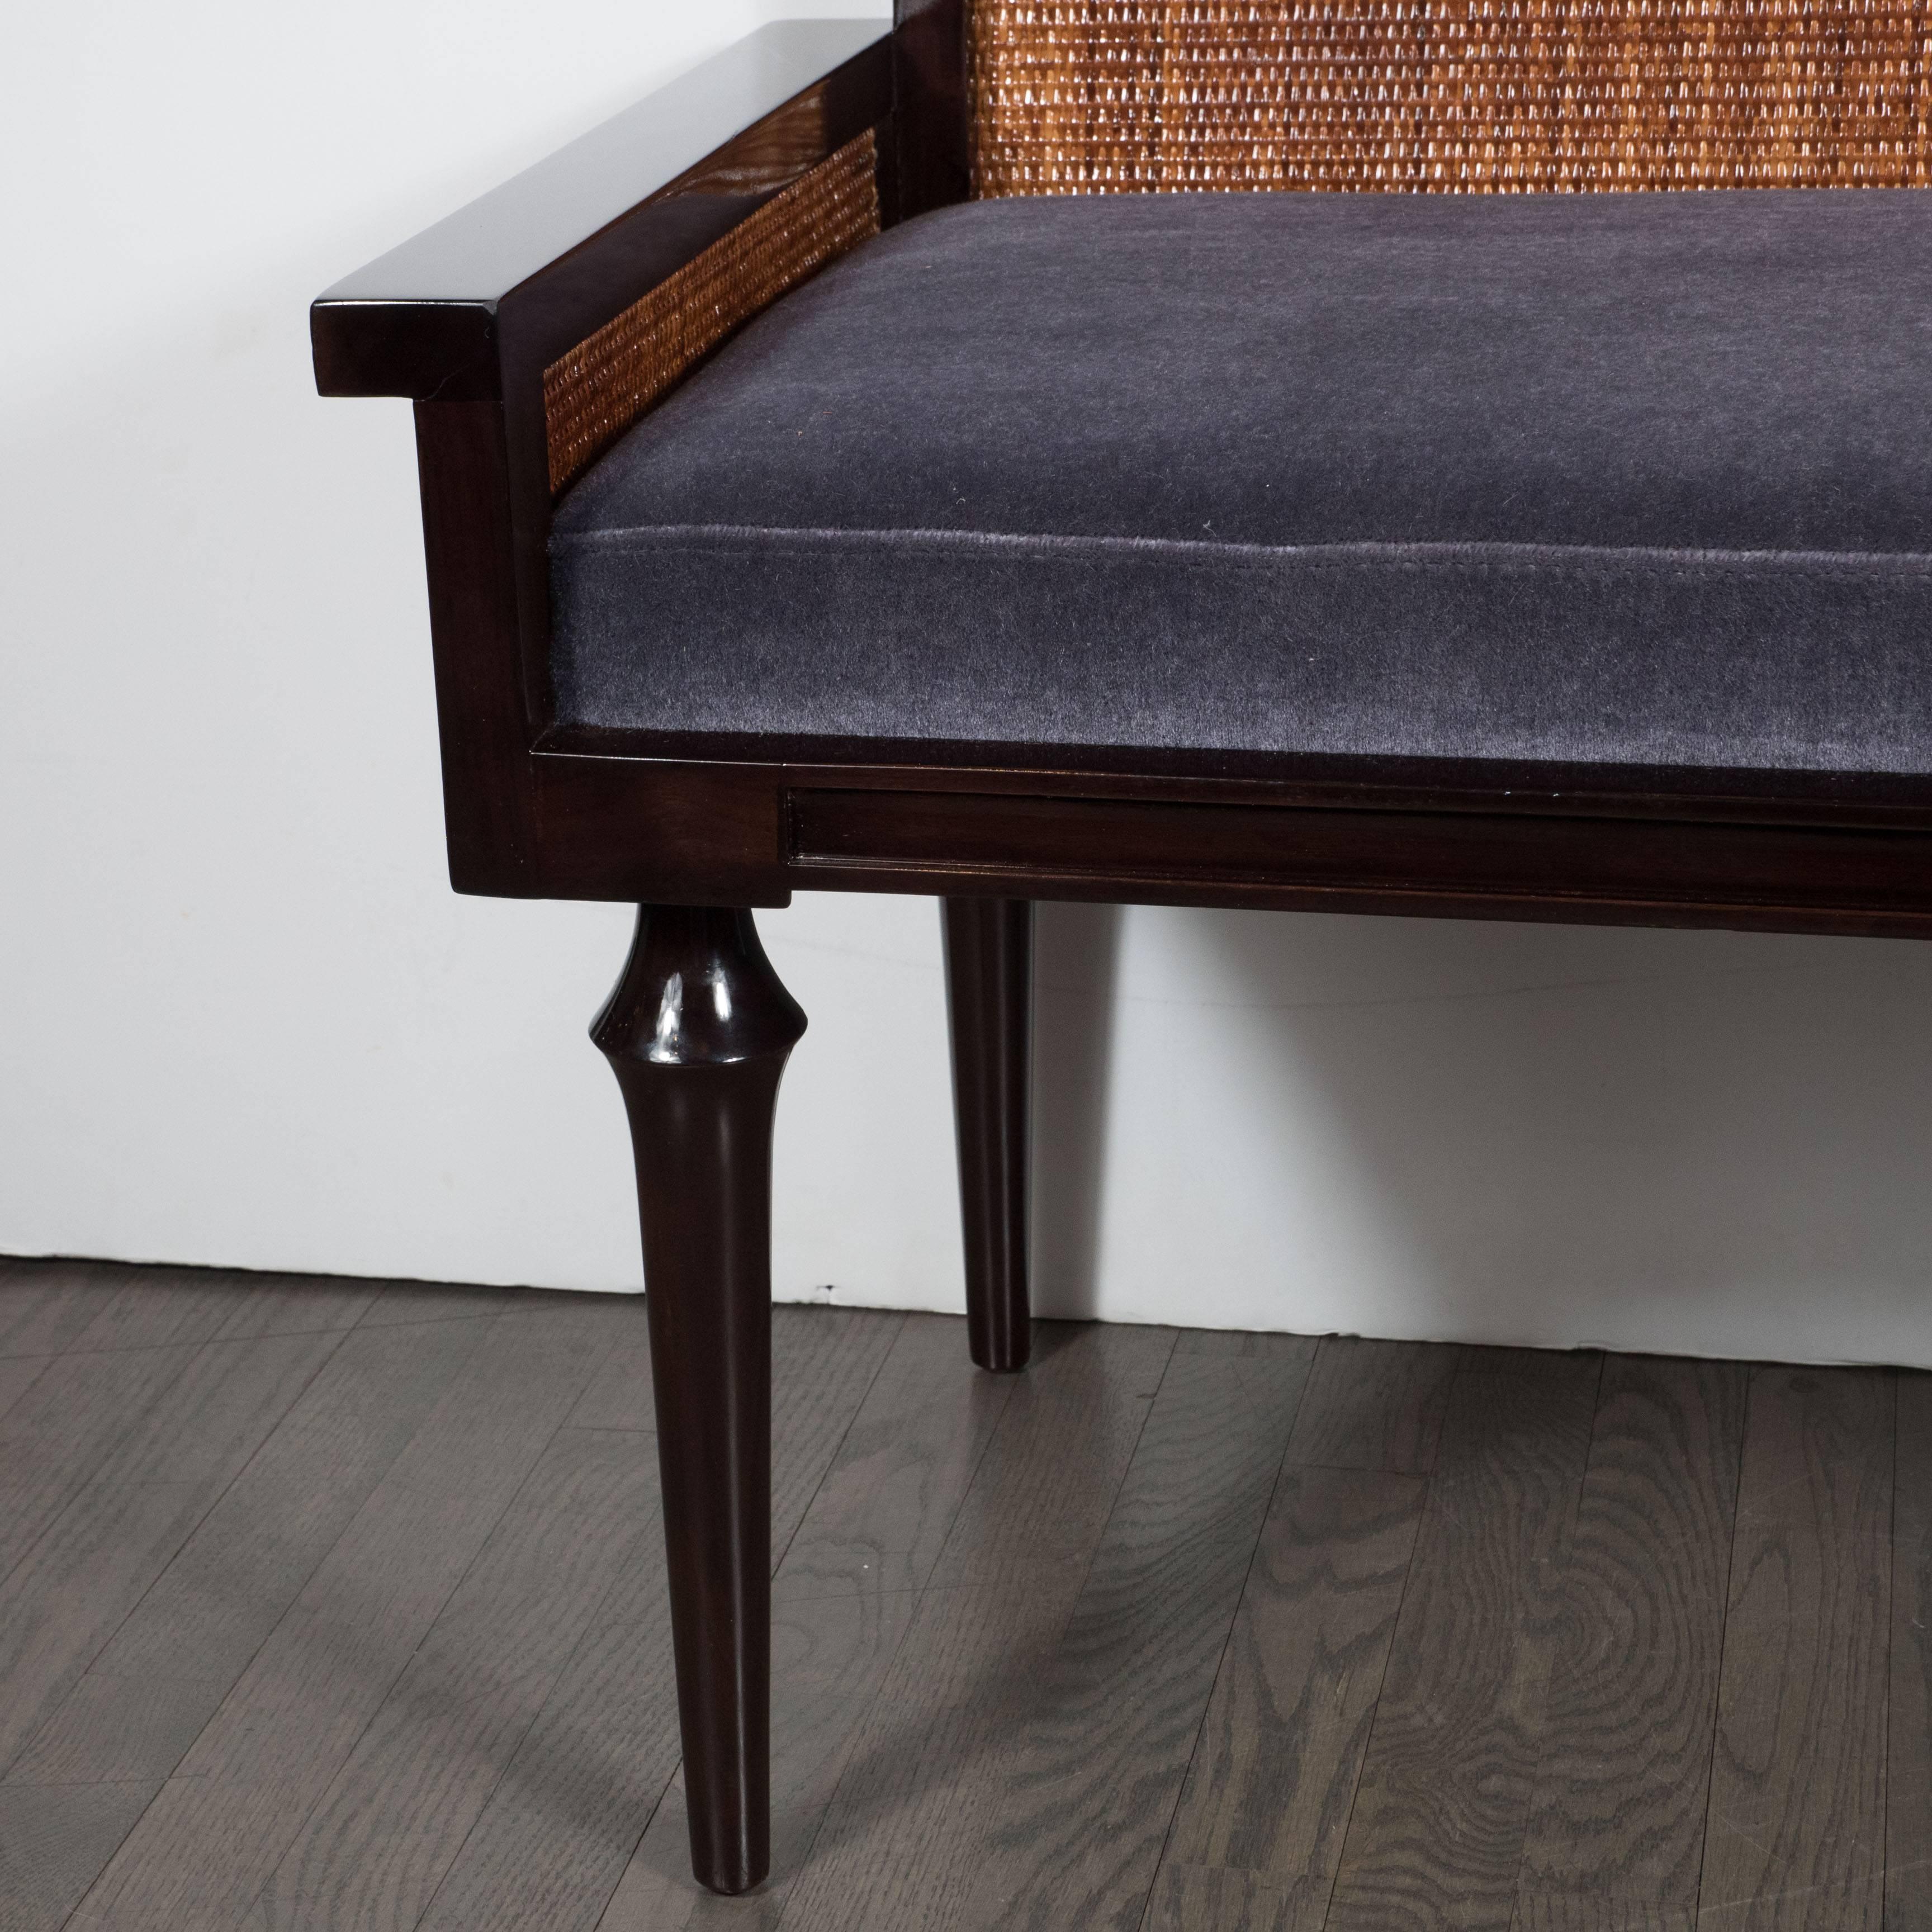 A Mid-Century modernist bench or settee in ebonized walnut with inset stained caning a smoked amethyst mohair. Conical legs support a clean, Minimalist frame. Flat armrests protrude from each side. A low-back features two panels of caning. Newly